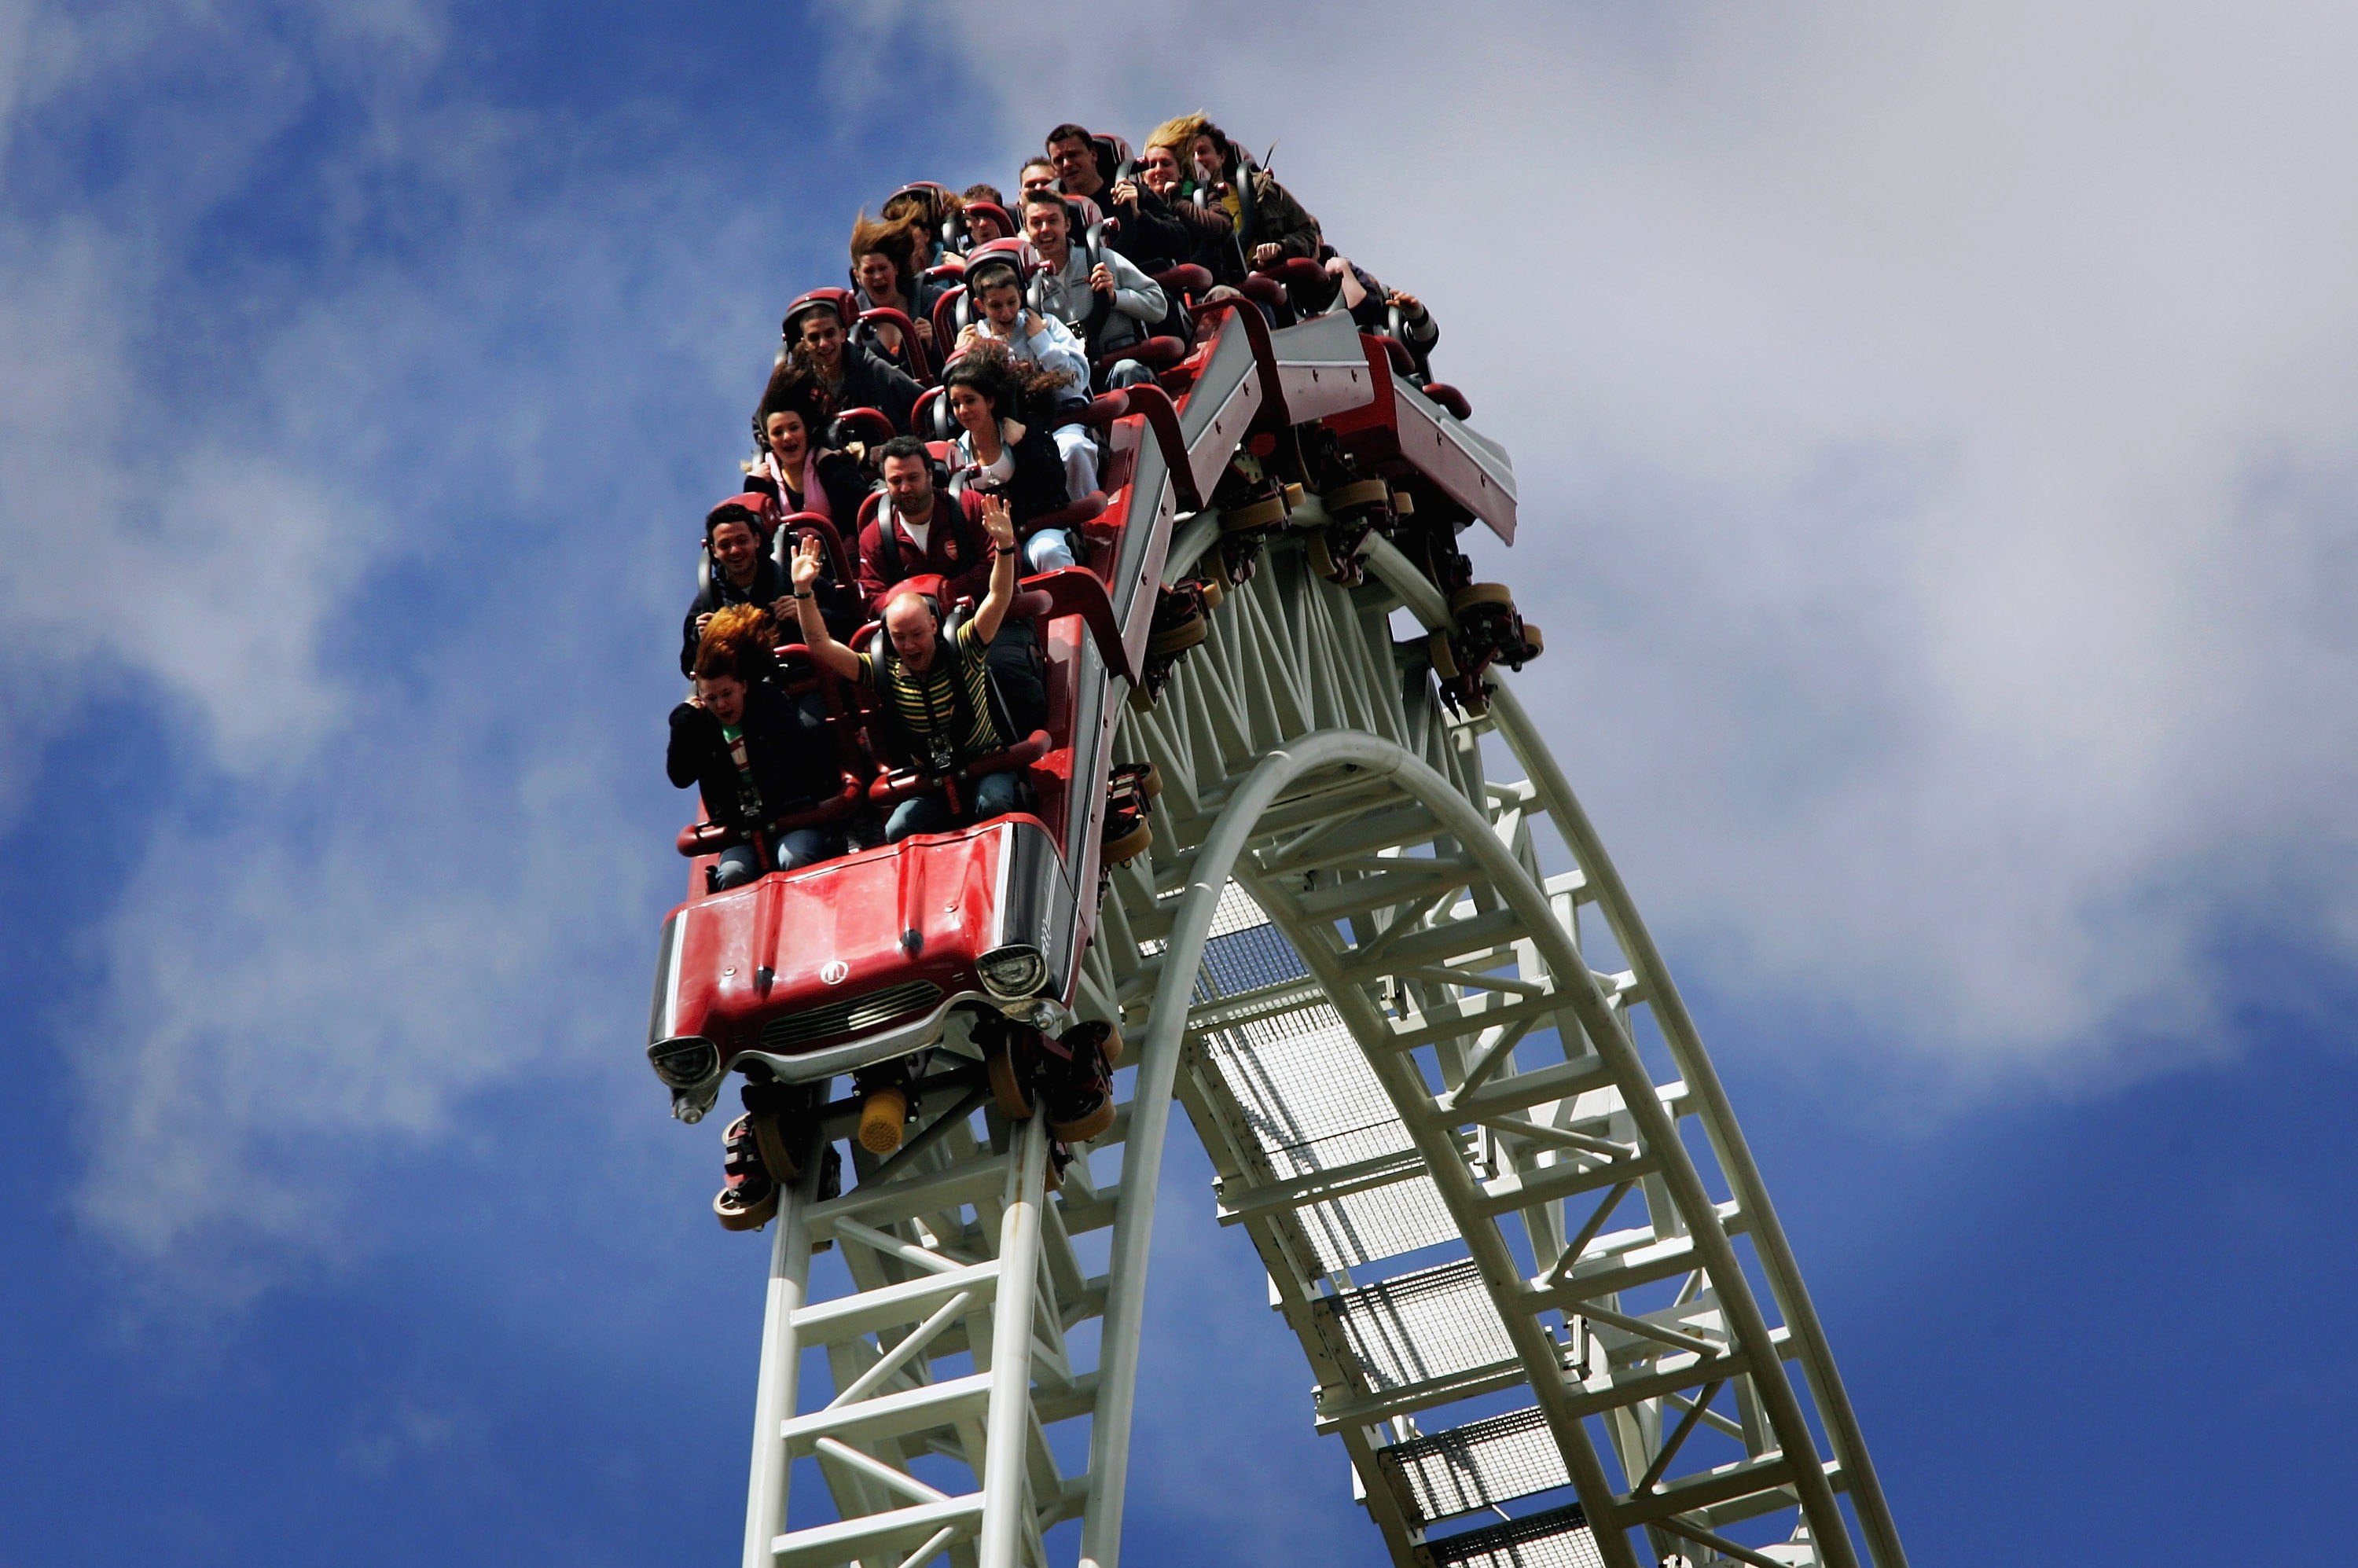 World's Fastest-Accelerating Roller Coaster Closes After Breaking Riders' Bones